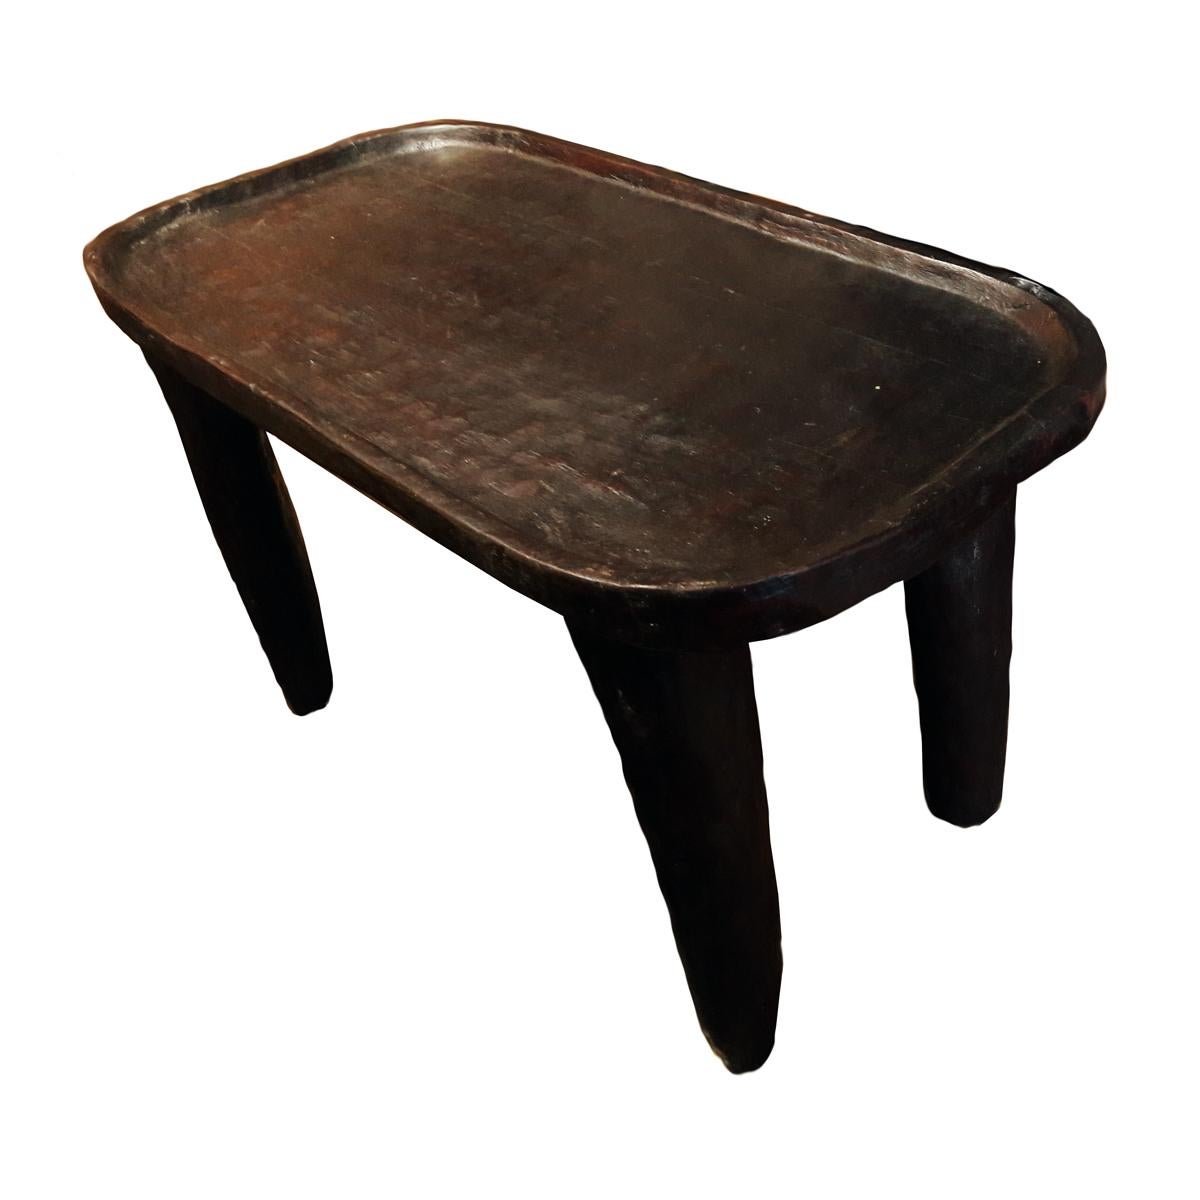 Rustic Hand Carved Wood Coffee Table from Ethiopia